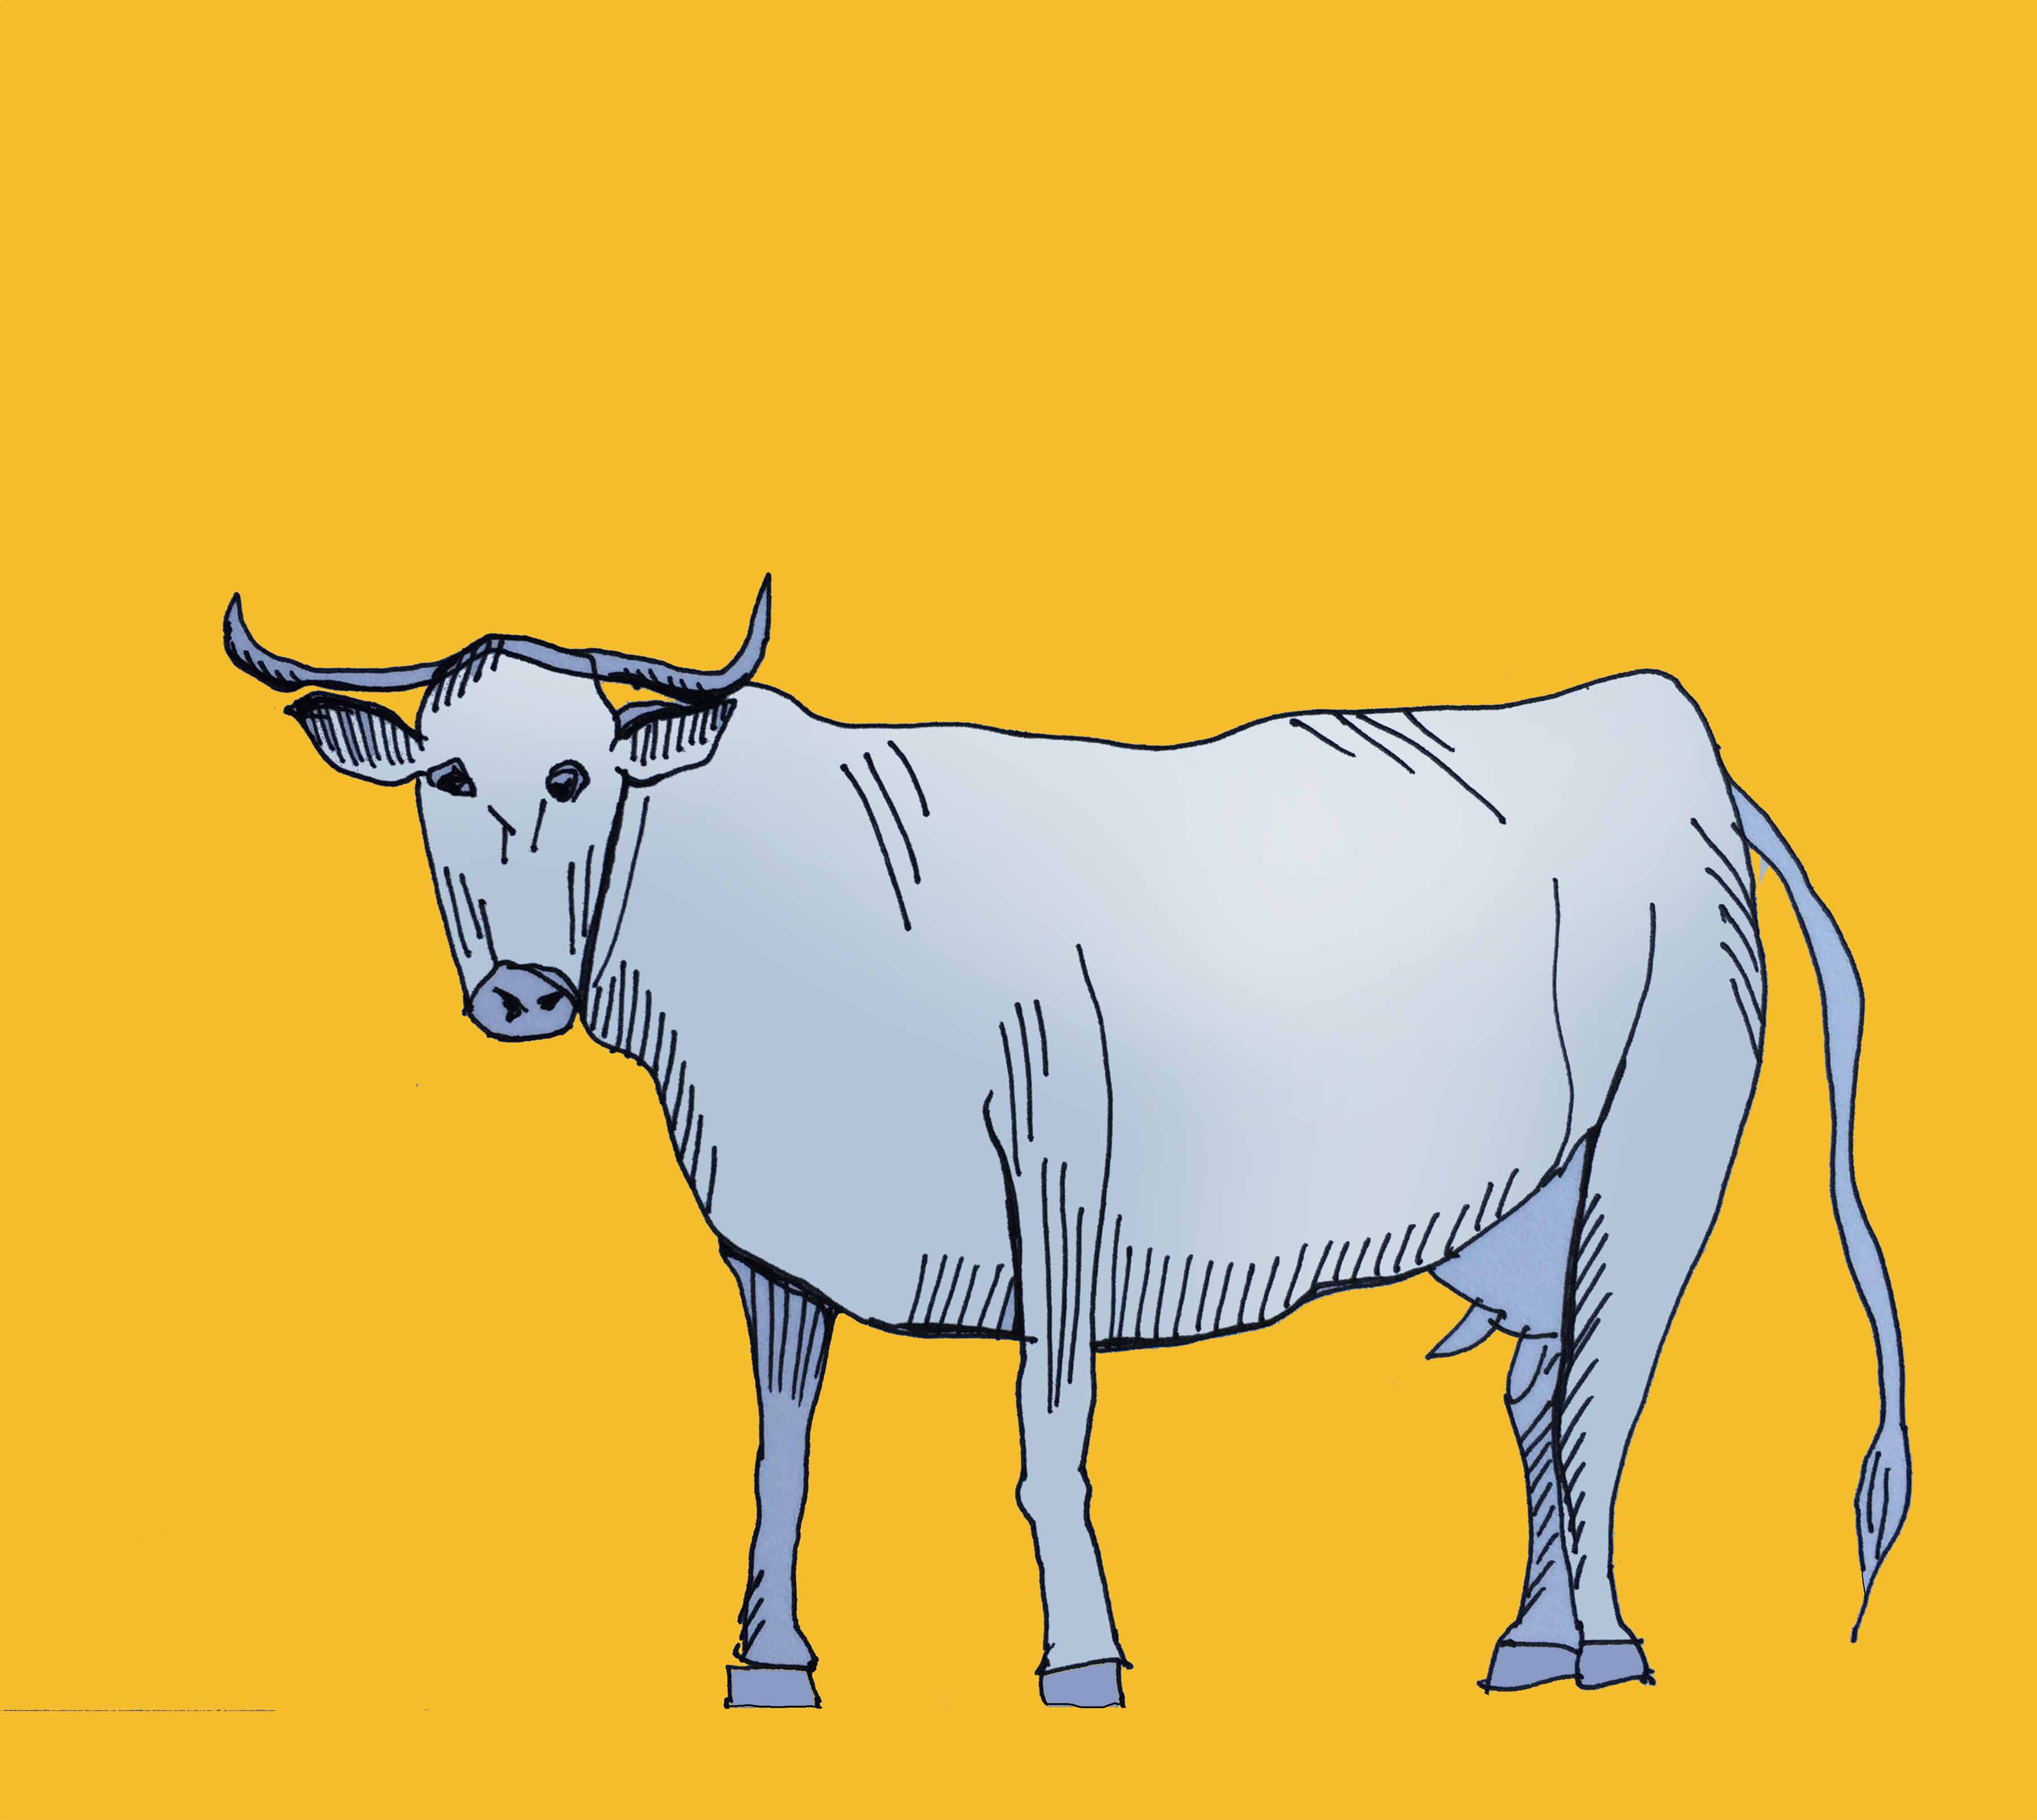 art every day number 168 / illustration / drawing / cow portrait two